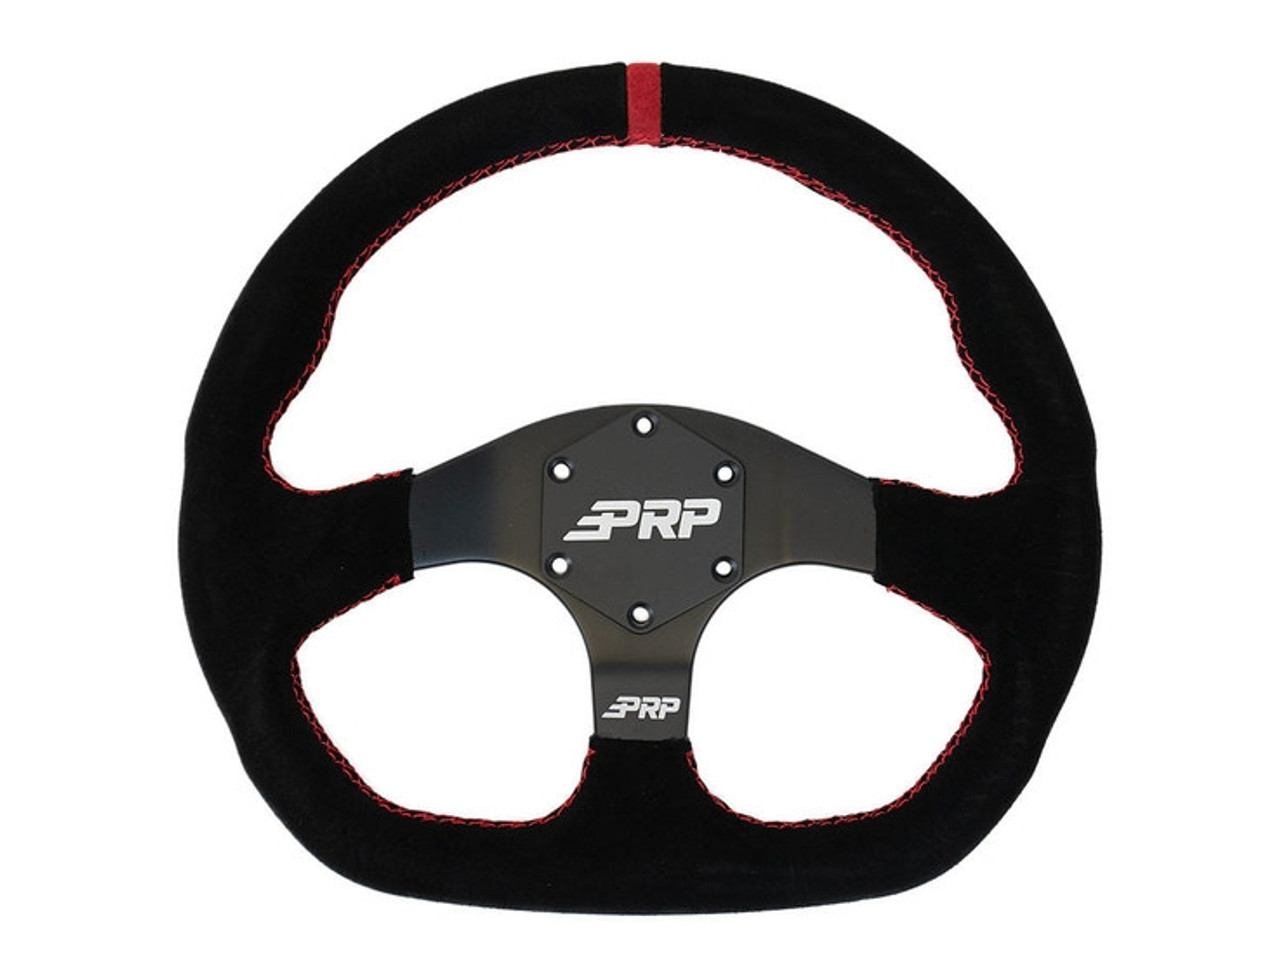 A Comp-R Steering Wheel by PRP Seats, bearing the PRP logo on the center cap, uninstalled and against a blank background.